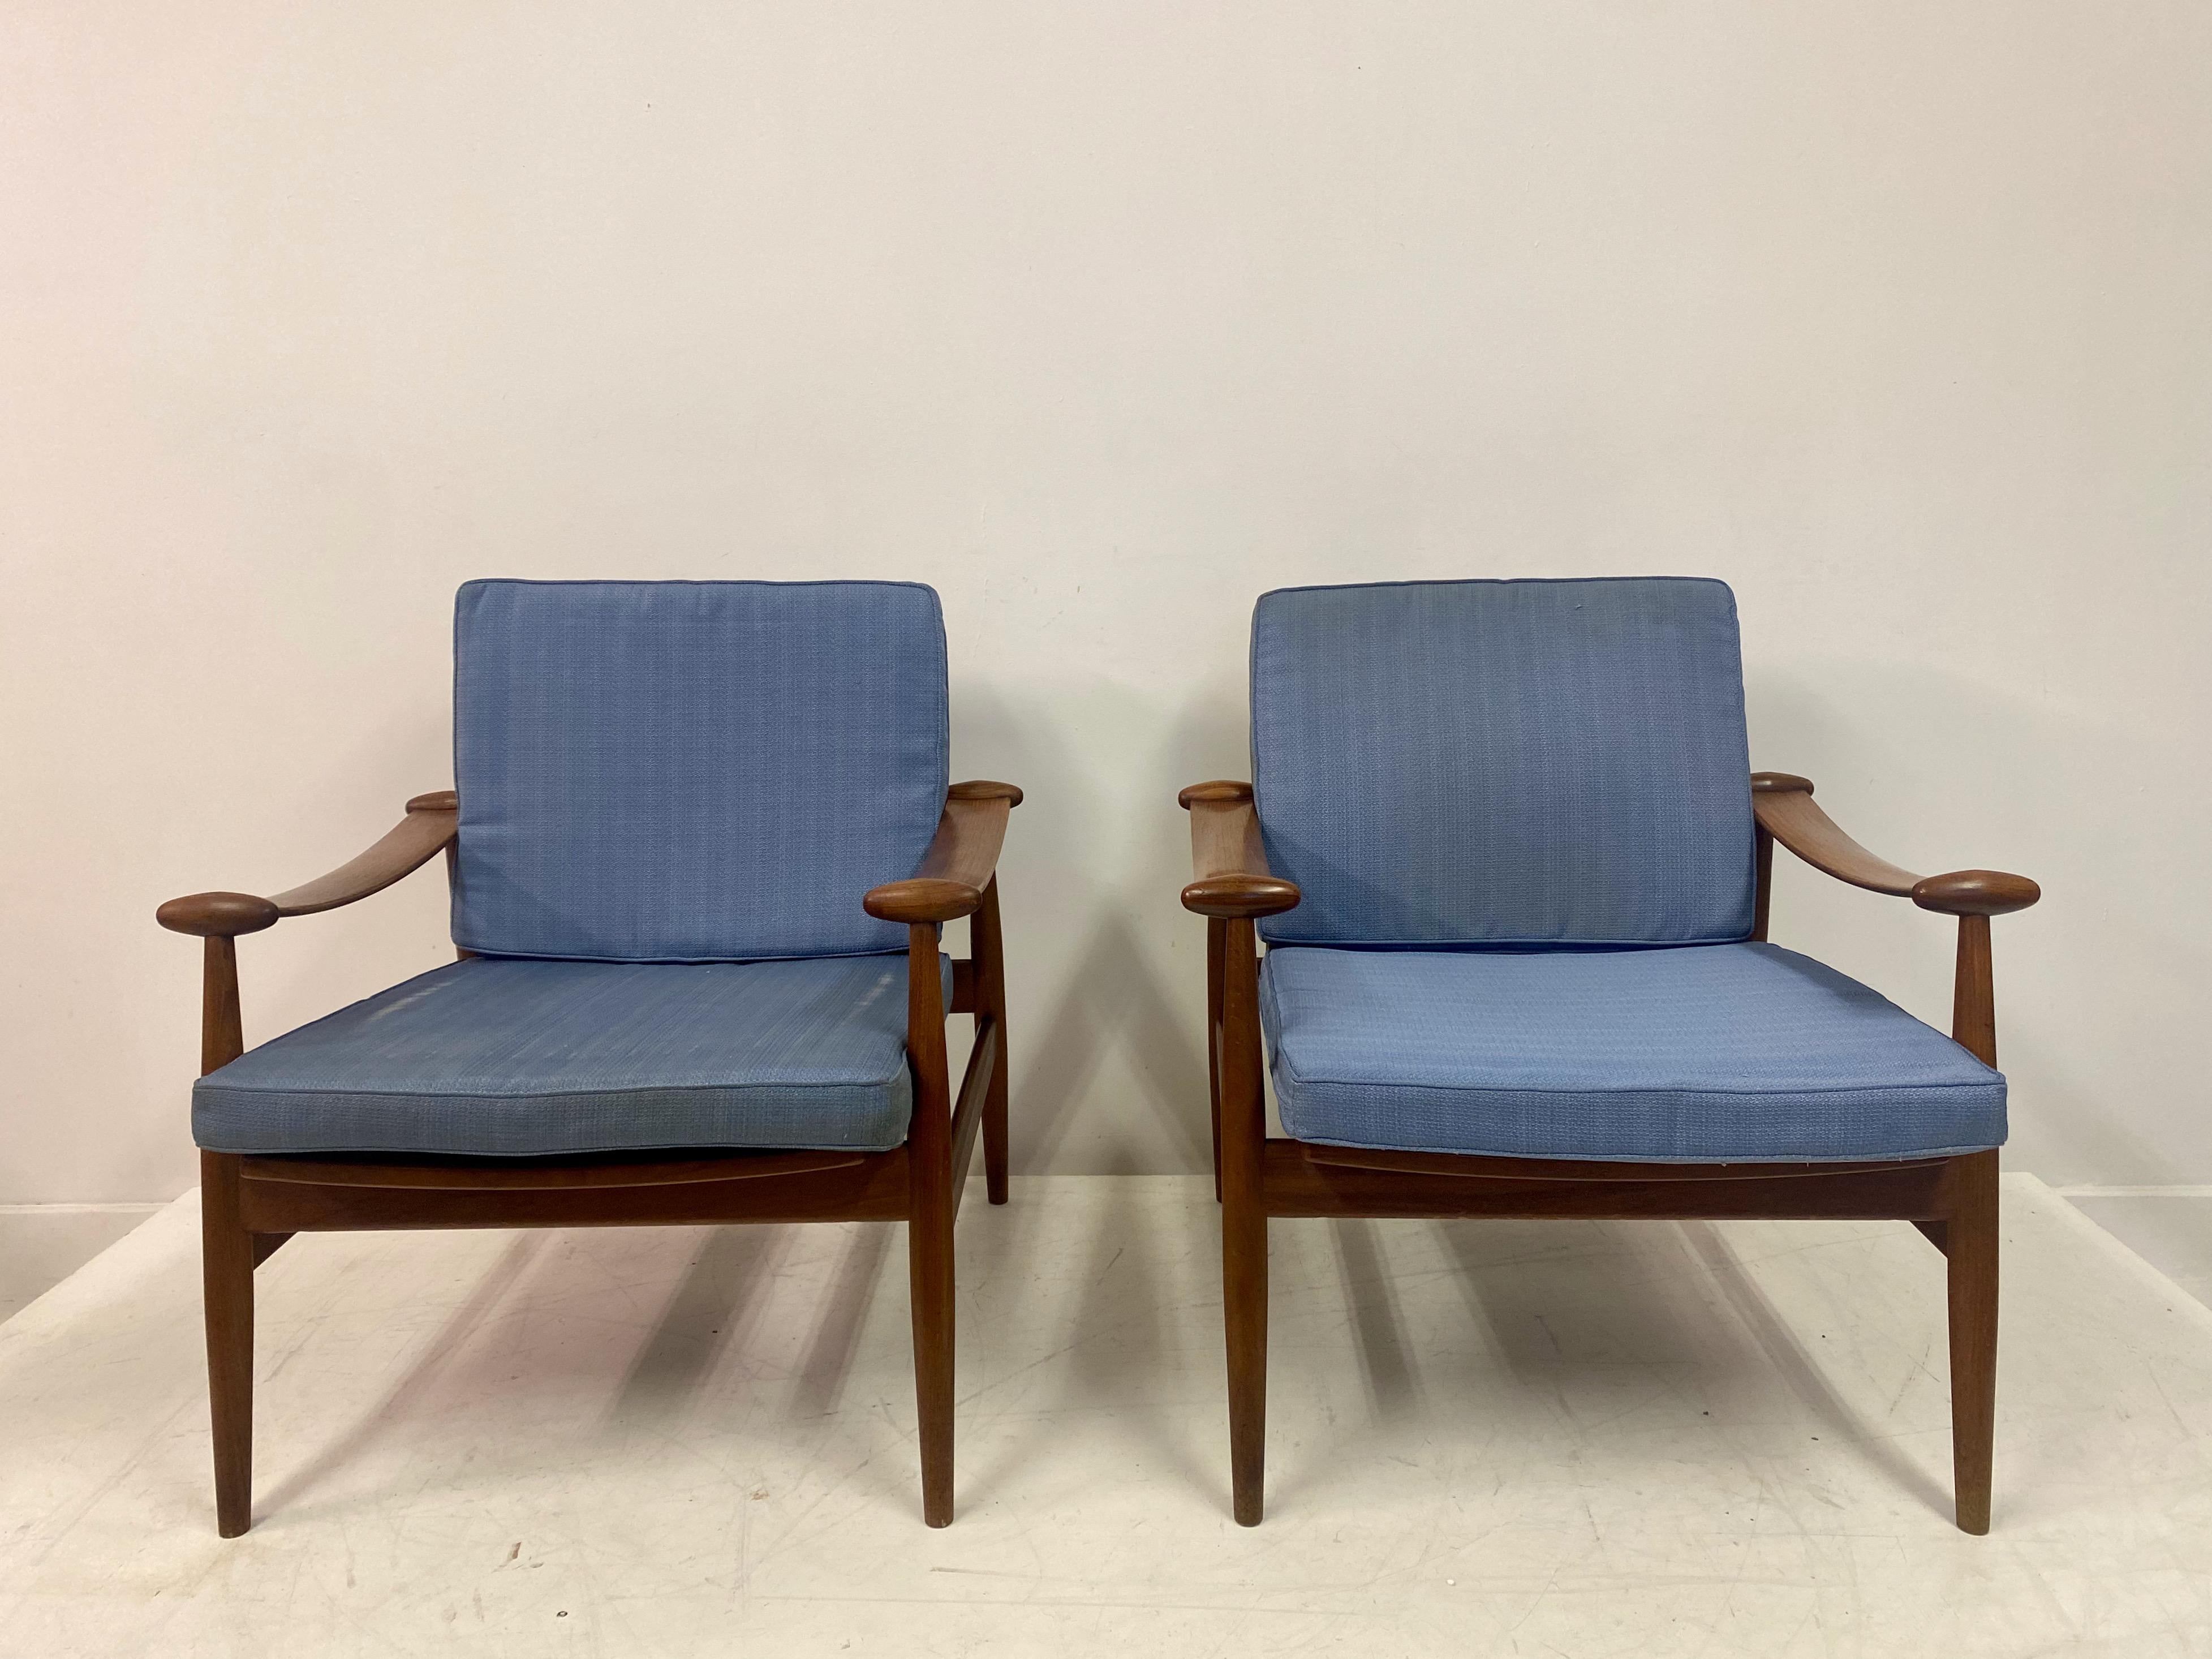 Mid-Century Modern Pair Of  Early Spade Chairs In Teak By Finn Juhl For France And Daverkosen